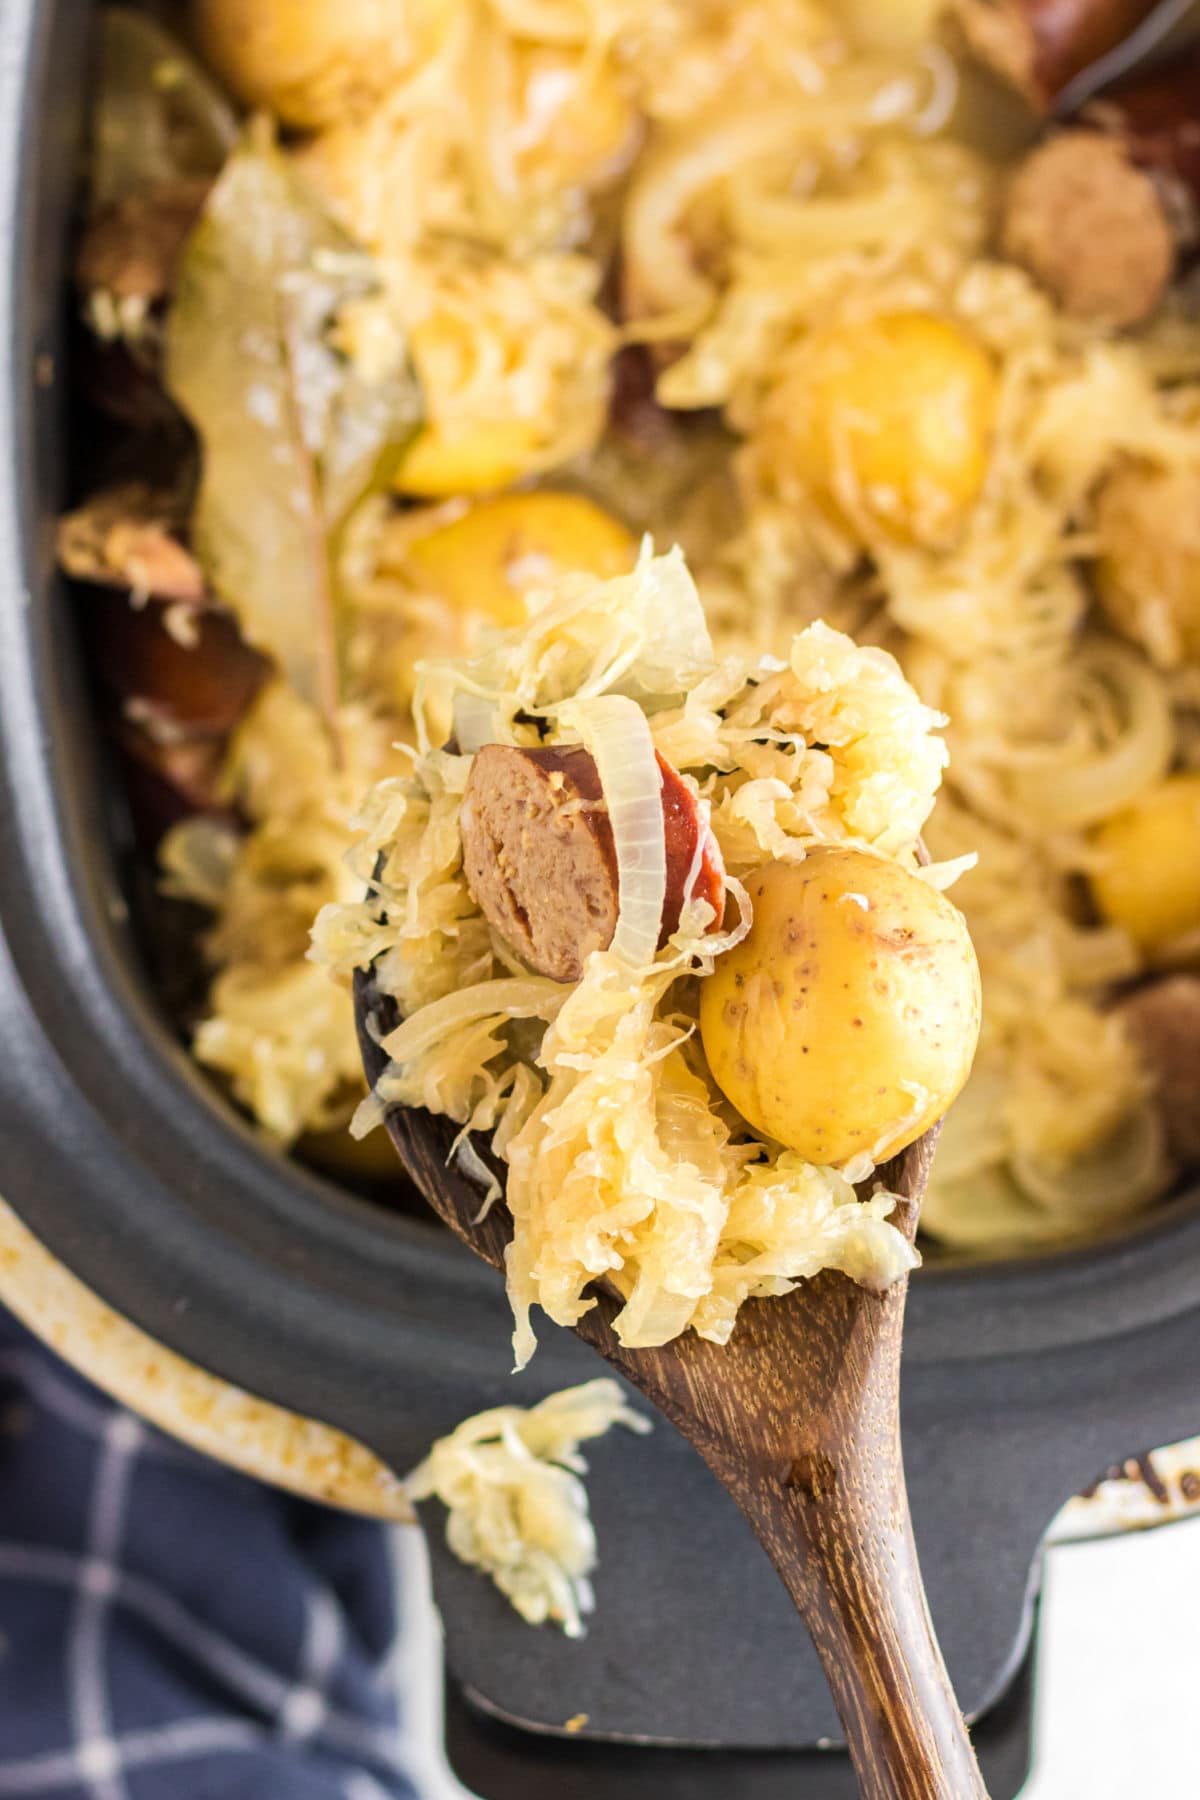 An overhead images of a scoop of kielbasa, sauerkraut, and potatoes on a wooden spoon hovers over a crockpot containing the rest of the food.